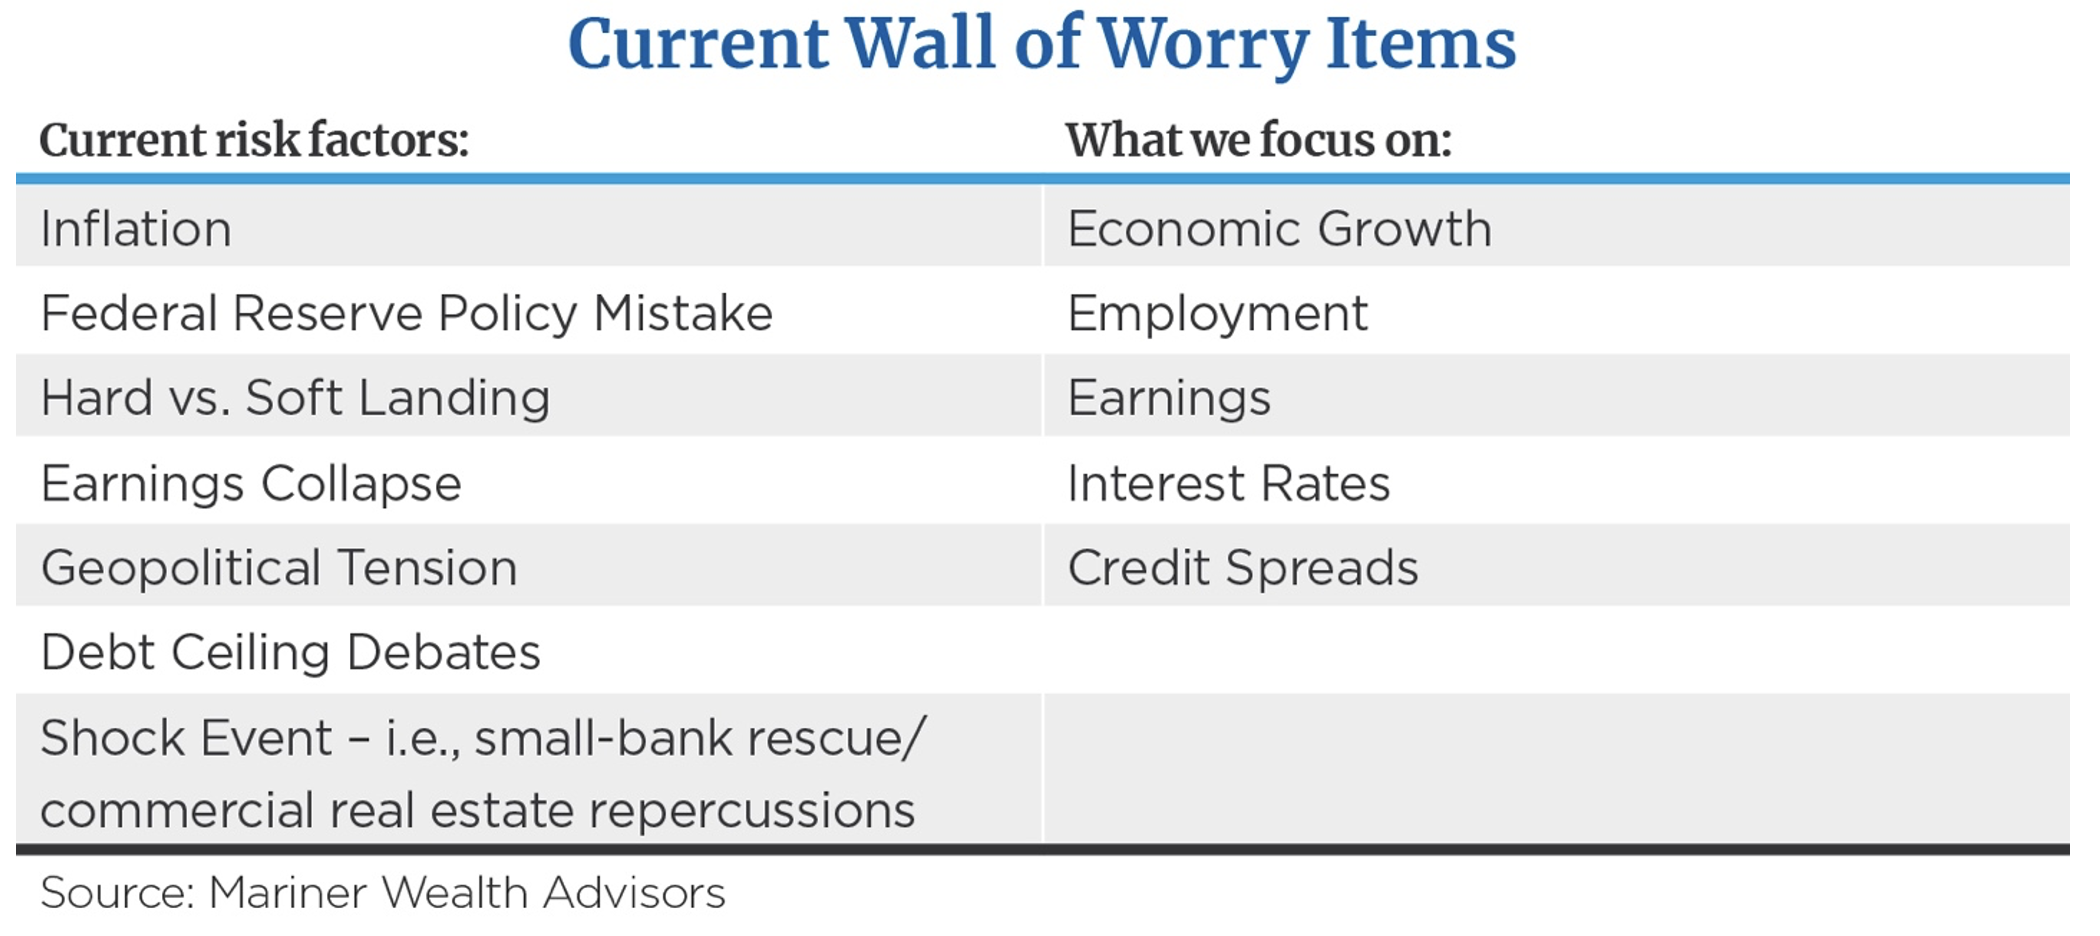 Current Wall of Worry Items